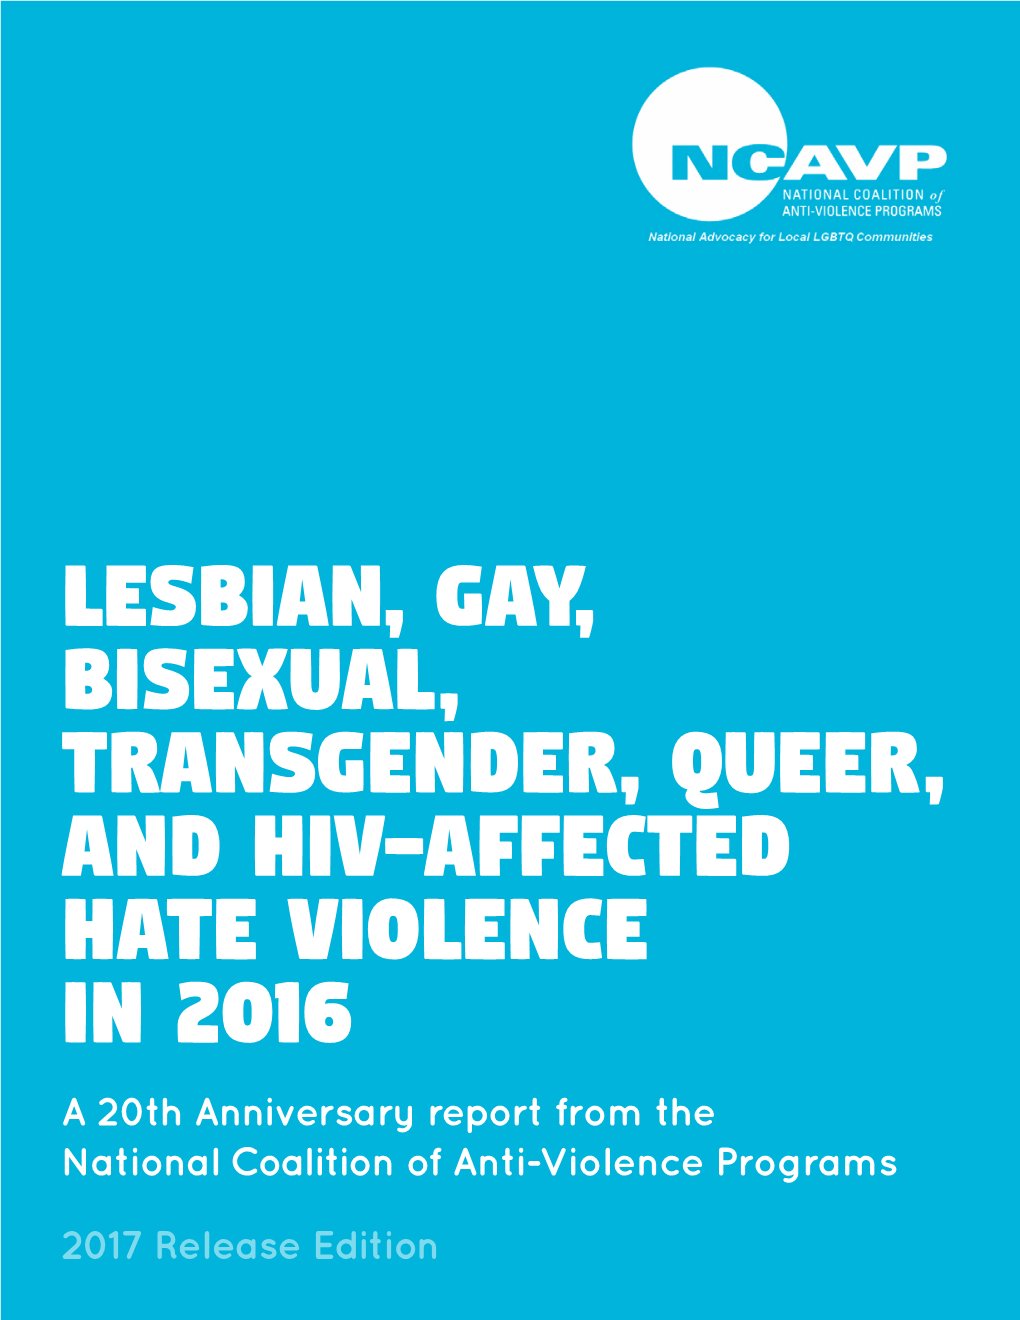 Lesbian, Gay, Bisexual, Transgender, Queer, and HIV-Affected Hate Violence in 2016 a 20Th Anniversary Report from the National Coalition of Anti-Violence Programs